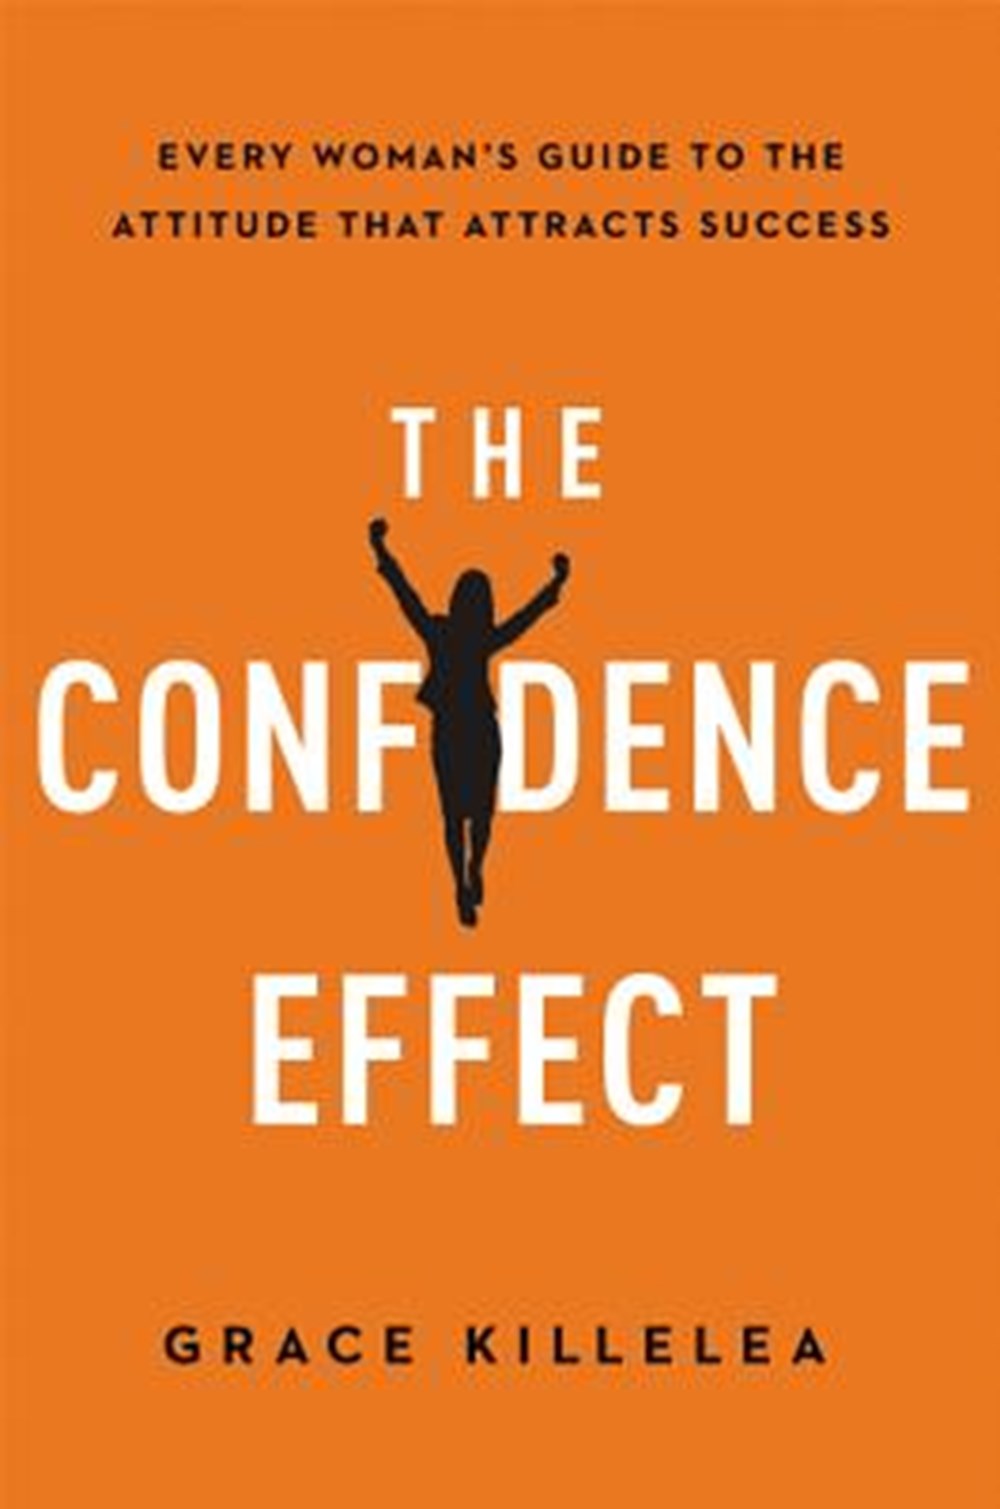 Confidence Effect Every Woman's Guide to the Attitude That Attracts Success